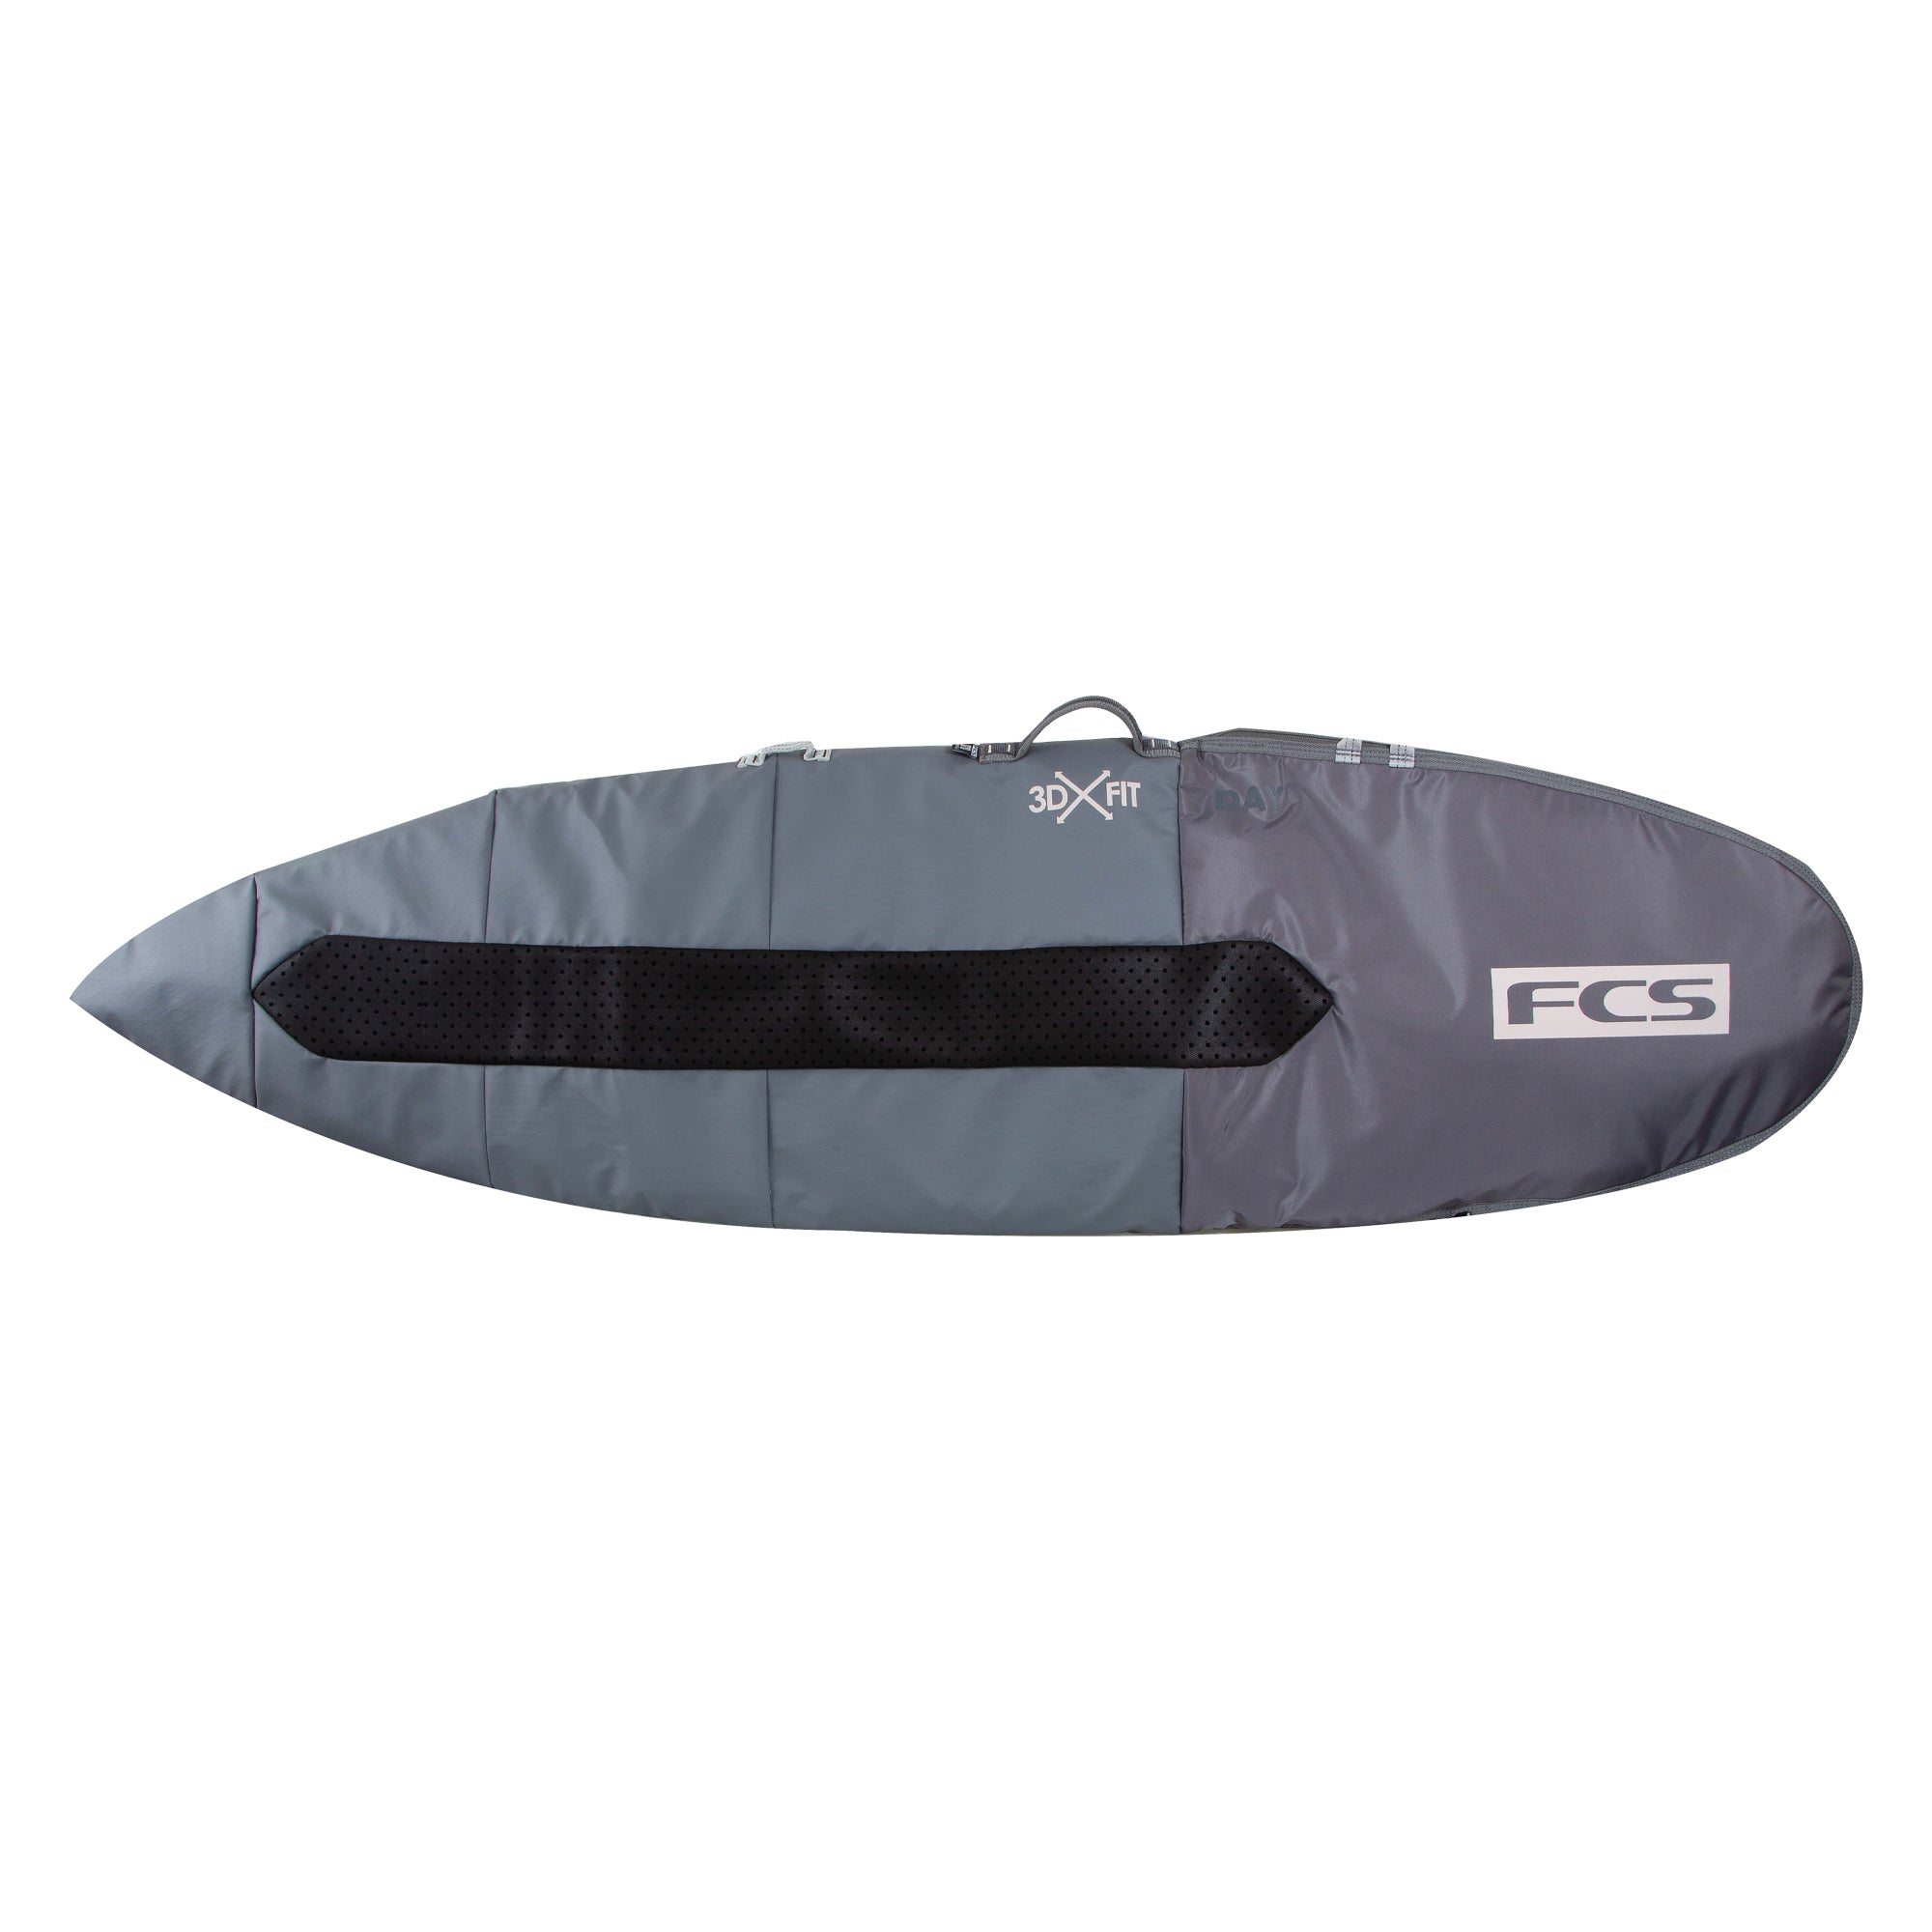 FCS Day All Purpose Surfboard Cover Steel Warm Grey - Jungle Surf Store - Bali Indonesia